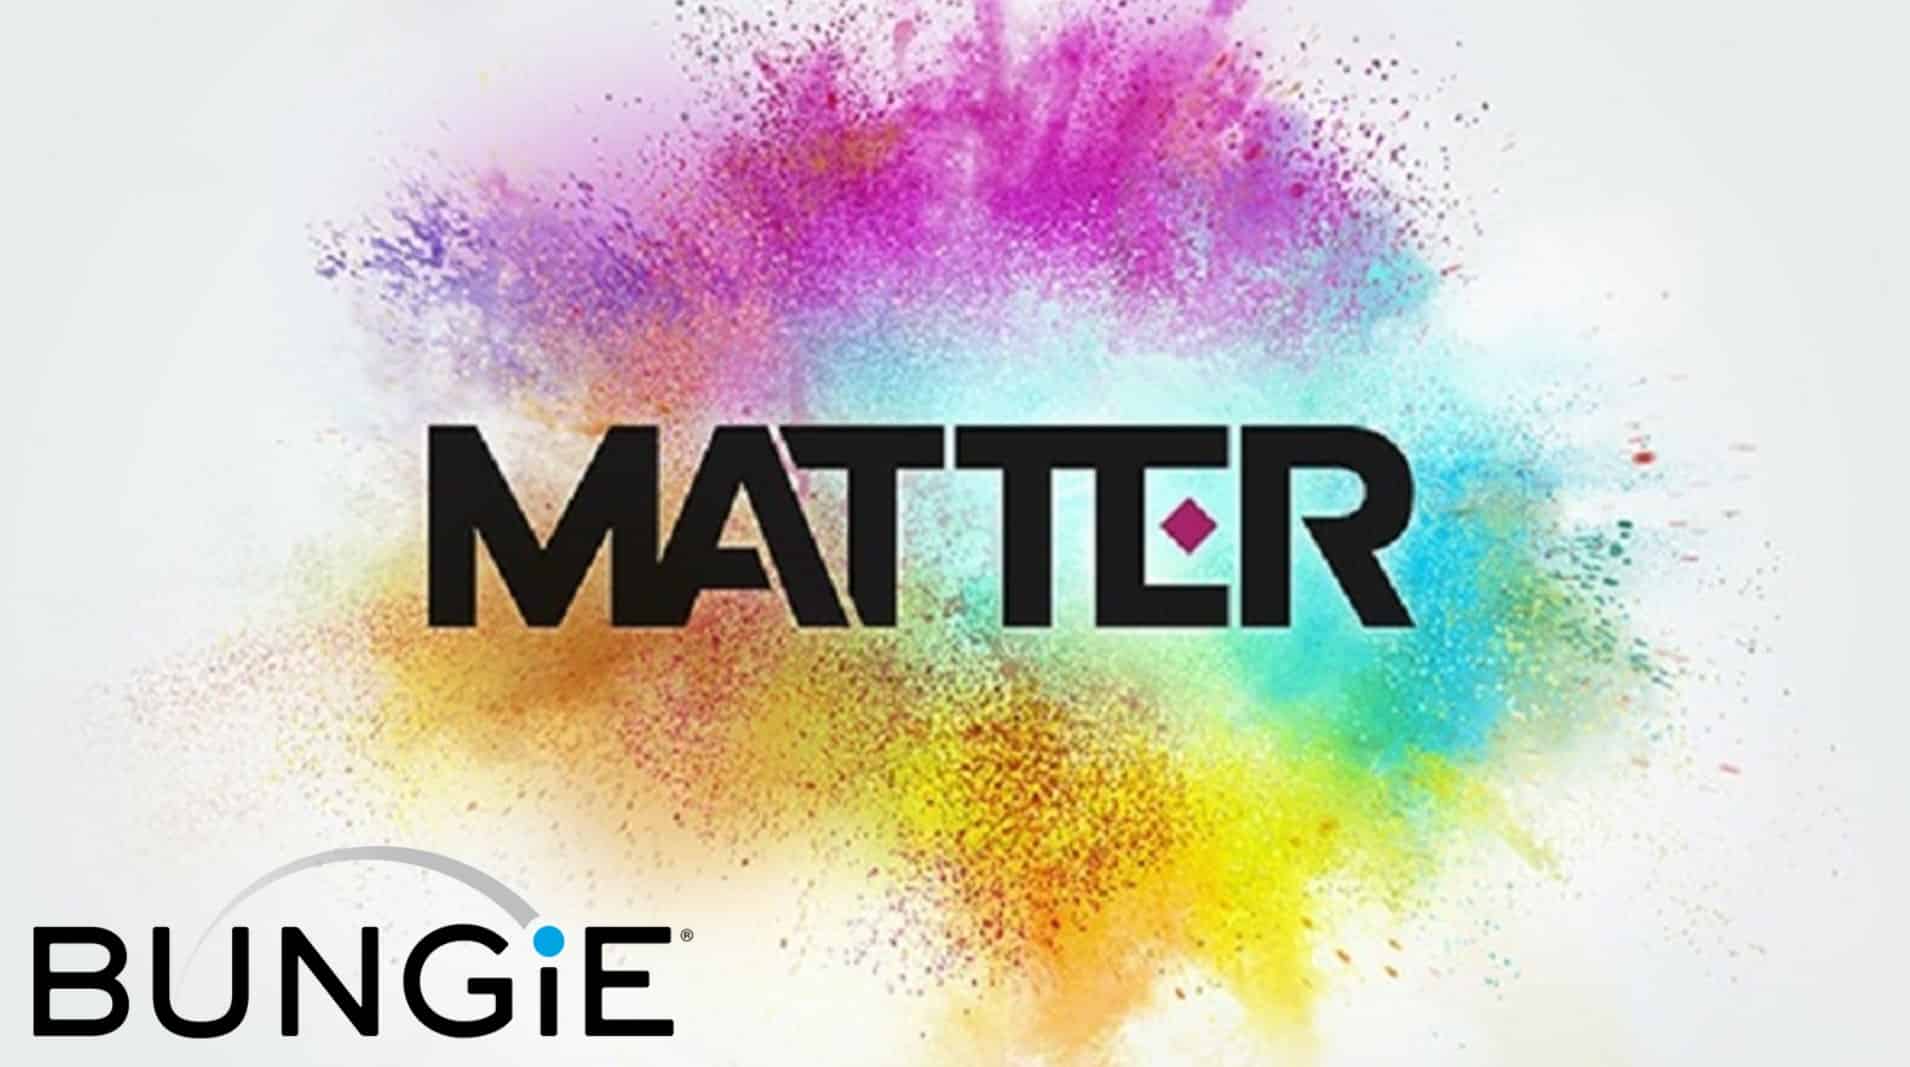 logo for Bungie's Matter game